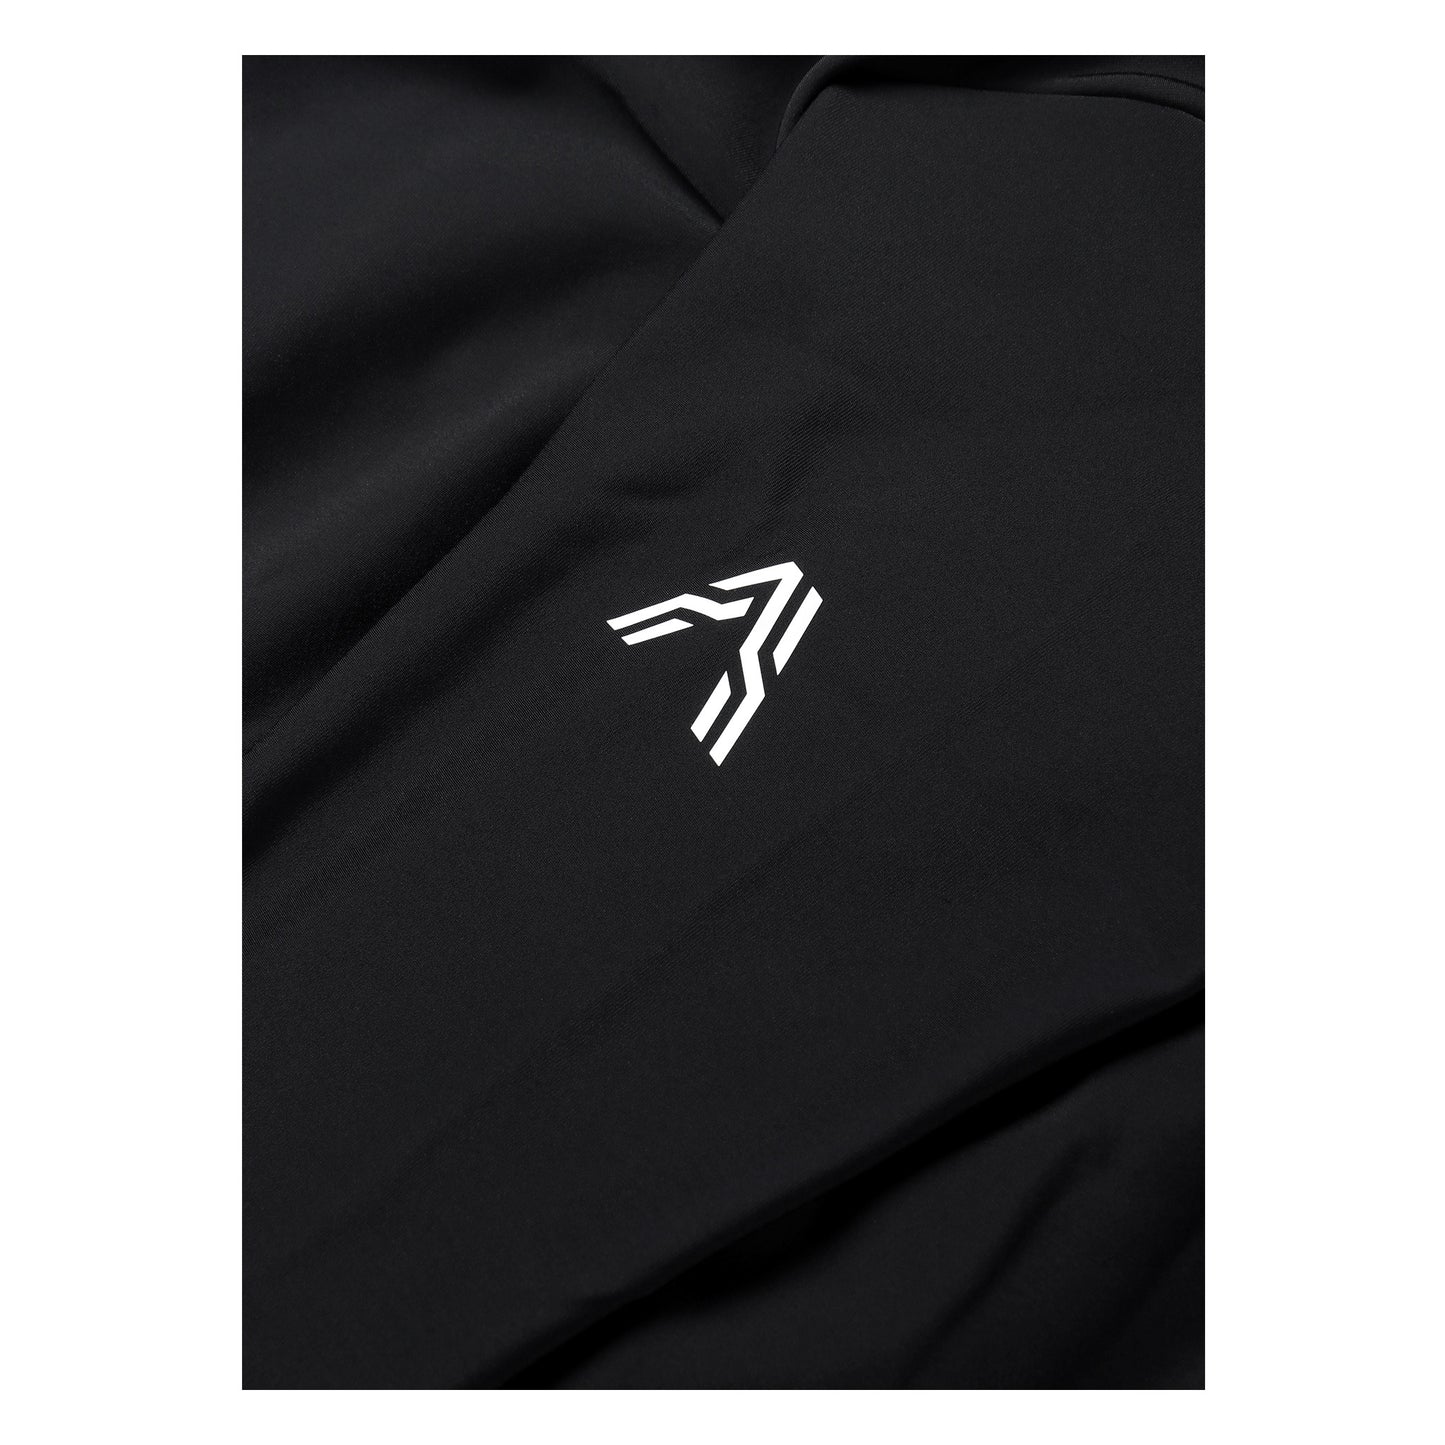 Milano Thermal Long Sleeve Jersey Black from Ascender Cycling Club Zürich Switzerland Monogram Ascender Logo on Sleeve View